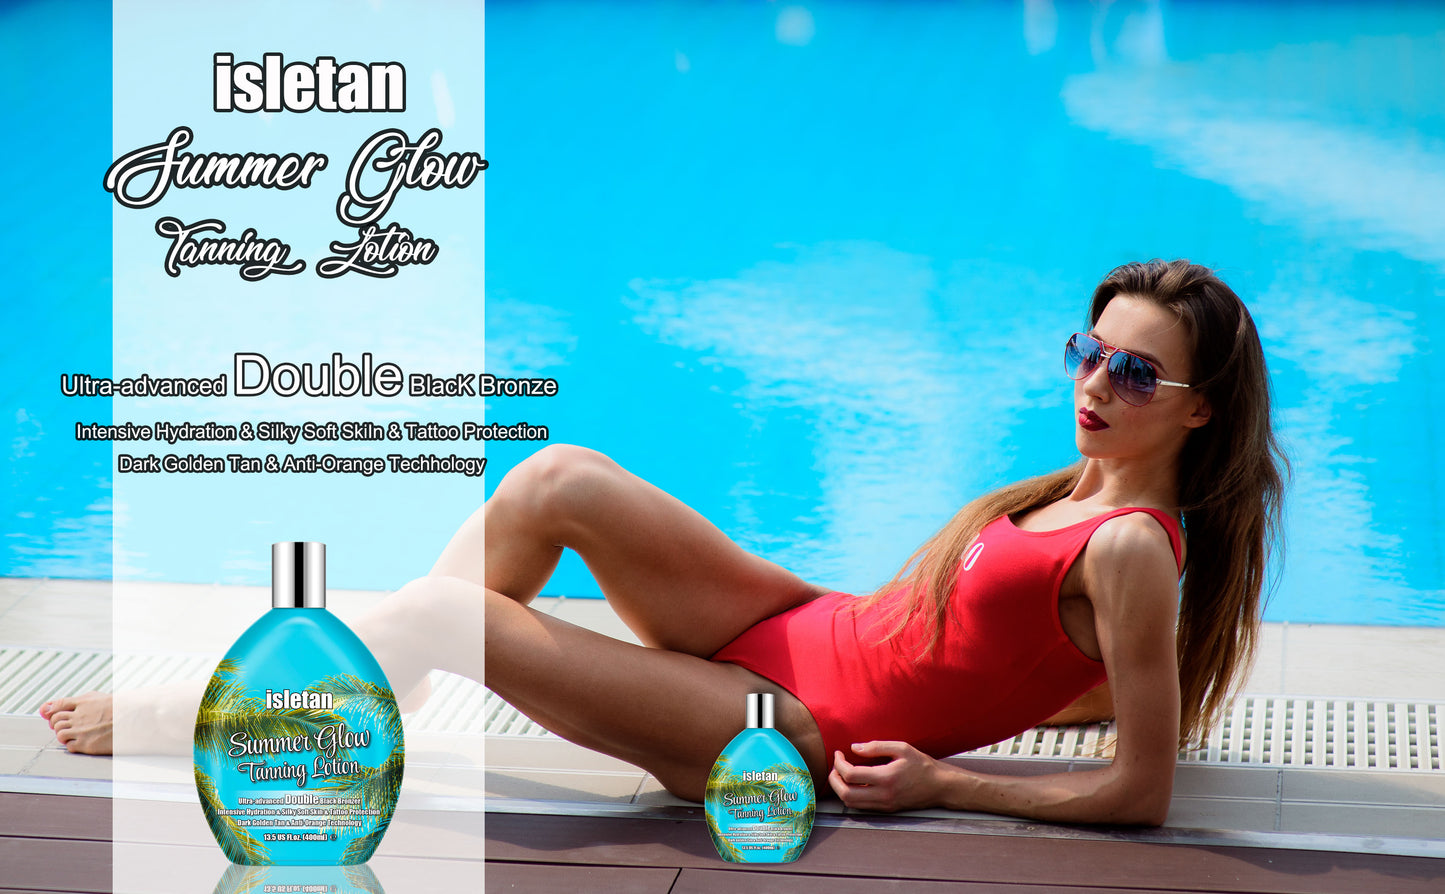 isletan Summer Glow Tanning Lotion Accelerator for Indoor Tanning Beds & Outdoor Sun with Bronzer to Get Dark Fast Tan